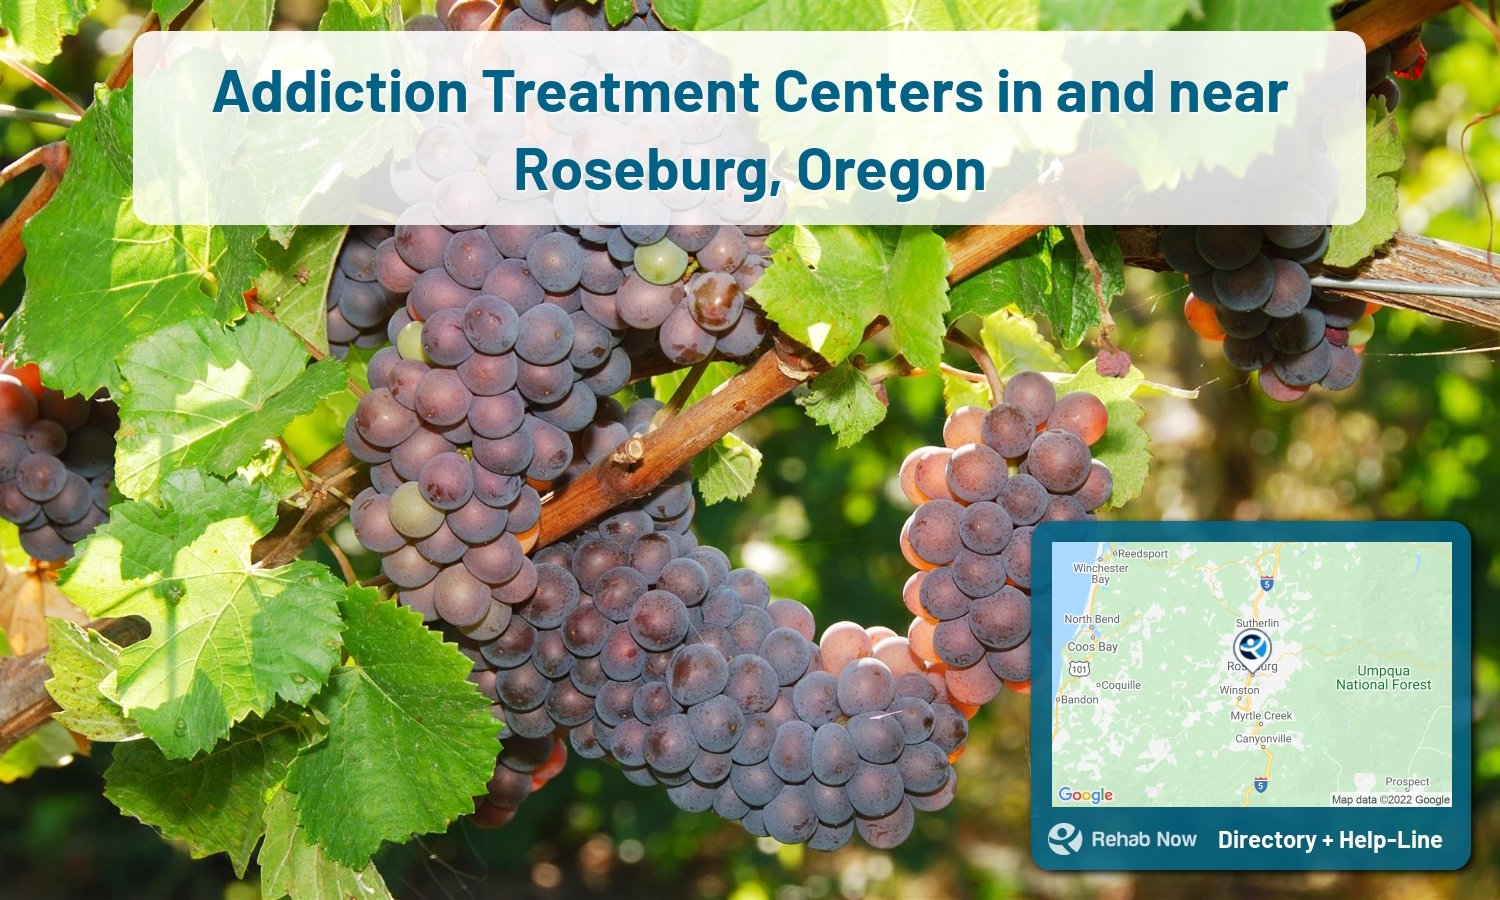 Roseburg, OR Treatment Centers. Find drug rehab in Roseburg, Oregon, or detox and treatment programs. Get the right help now!